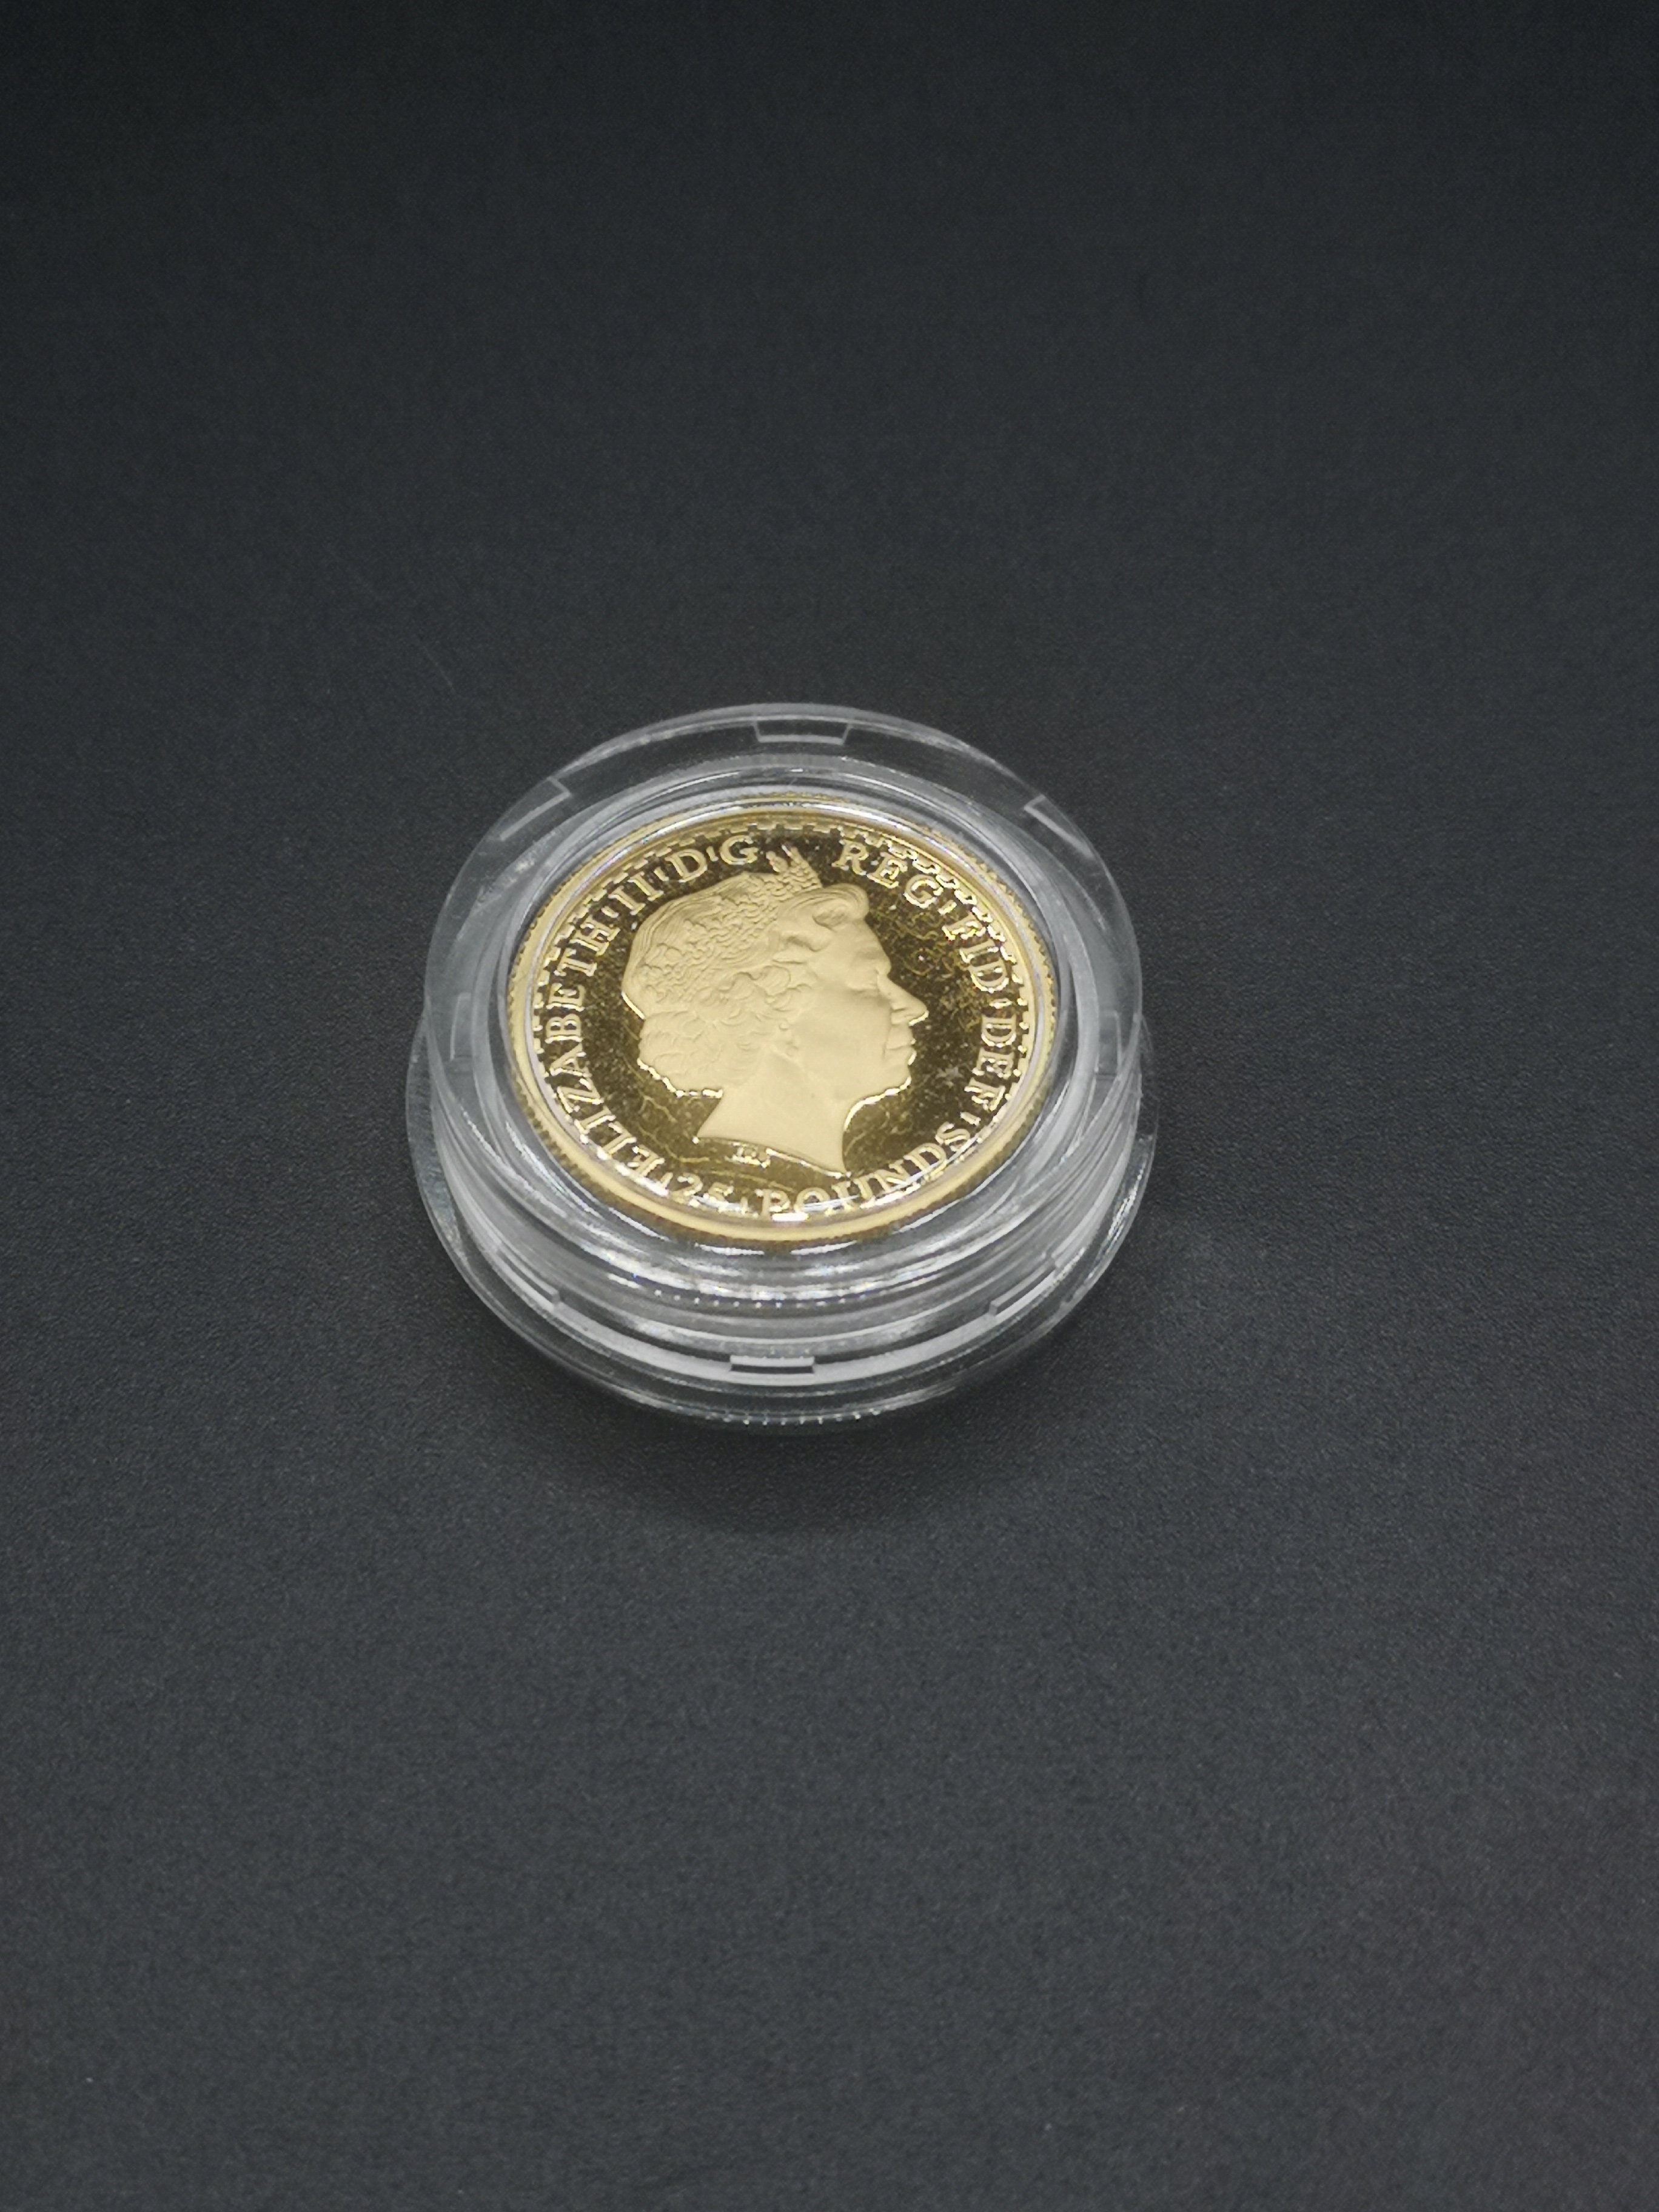 2007 1/4oz gold proof £25 coin - Image 4 of 4